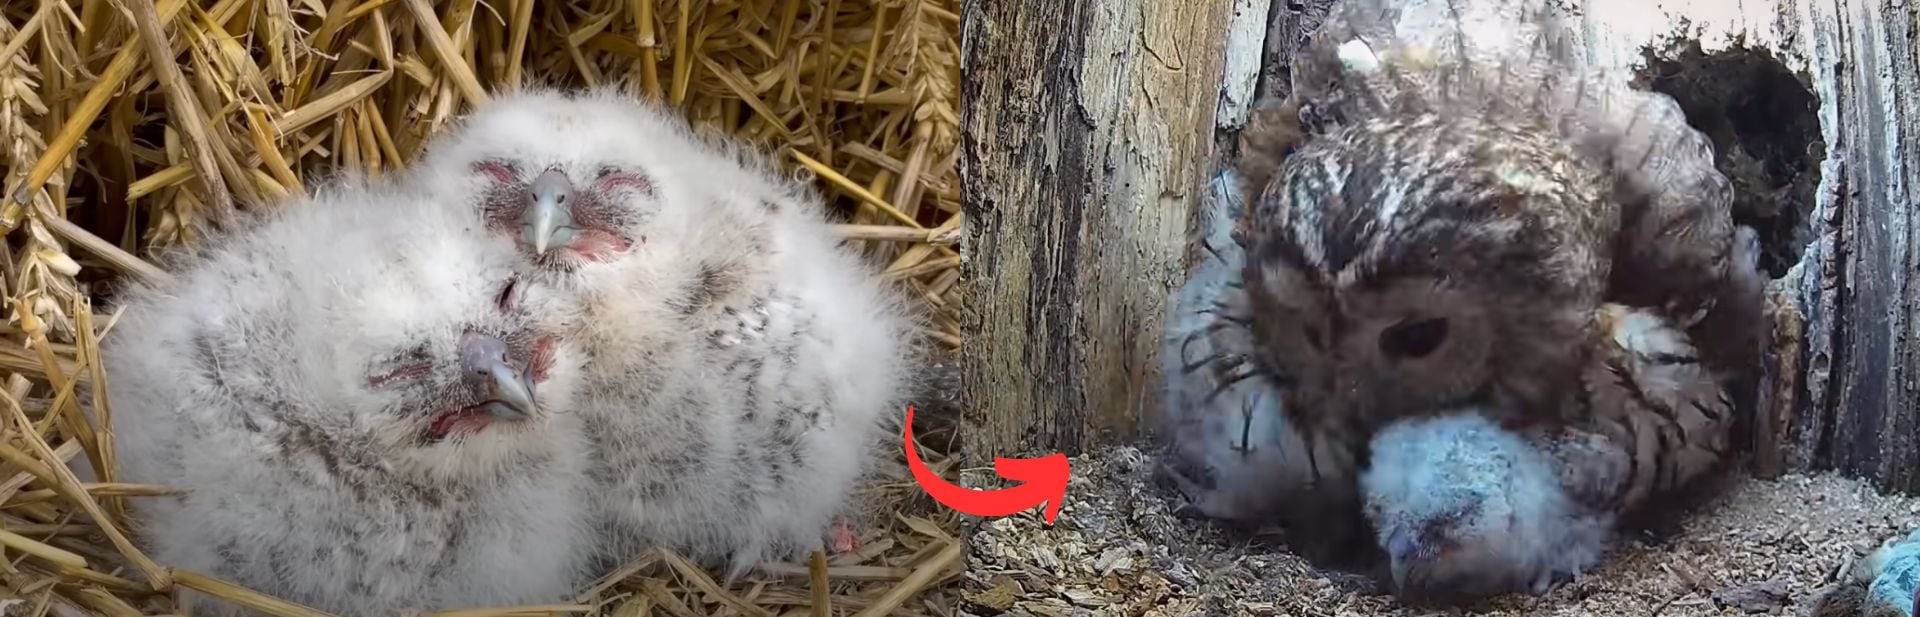 Helpless Owlets Faced A Grim Future Until An Owl Mother’s Instincts Kicked In